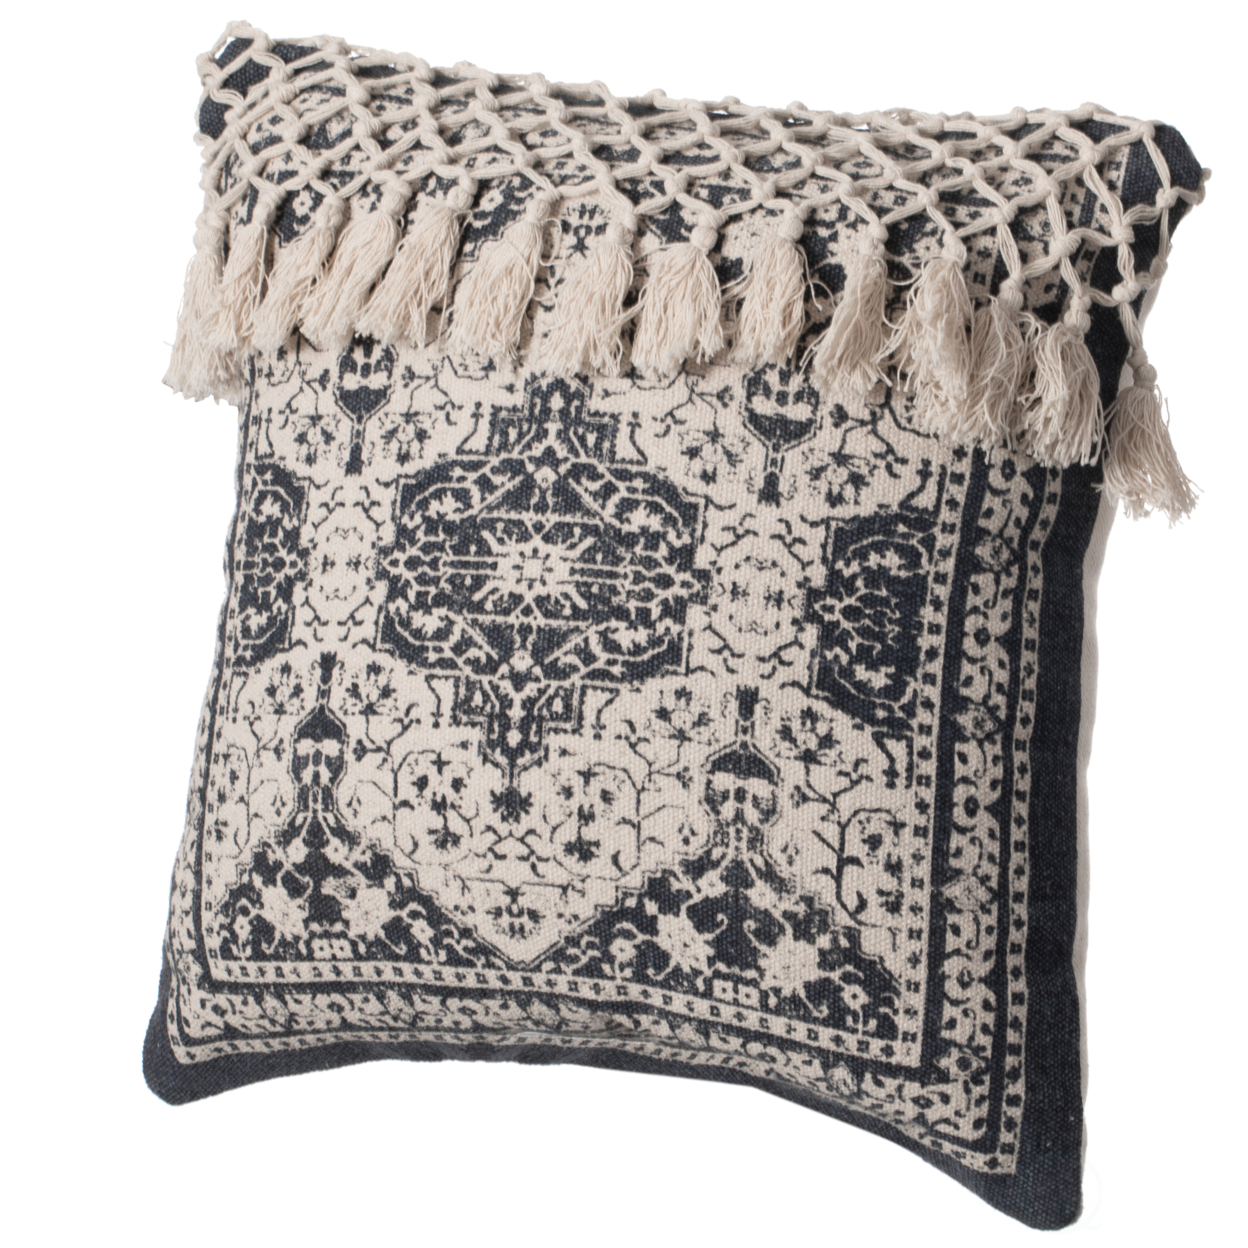 16" Handwoven Cotton Throw Pillow Cover with Traditional Pattern and Tasseled Top - navy with cushion